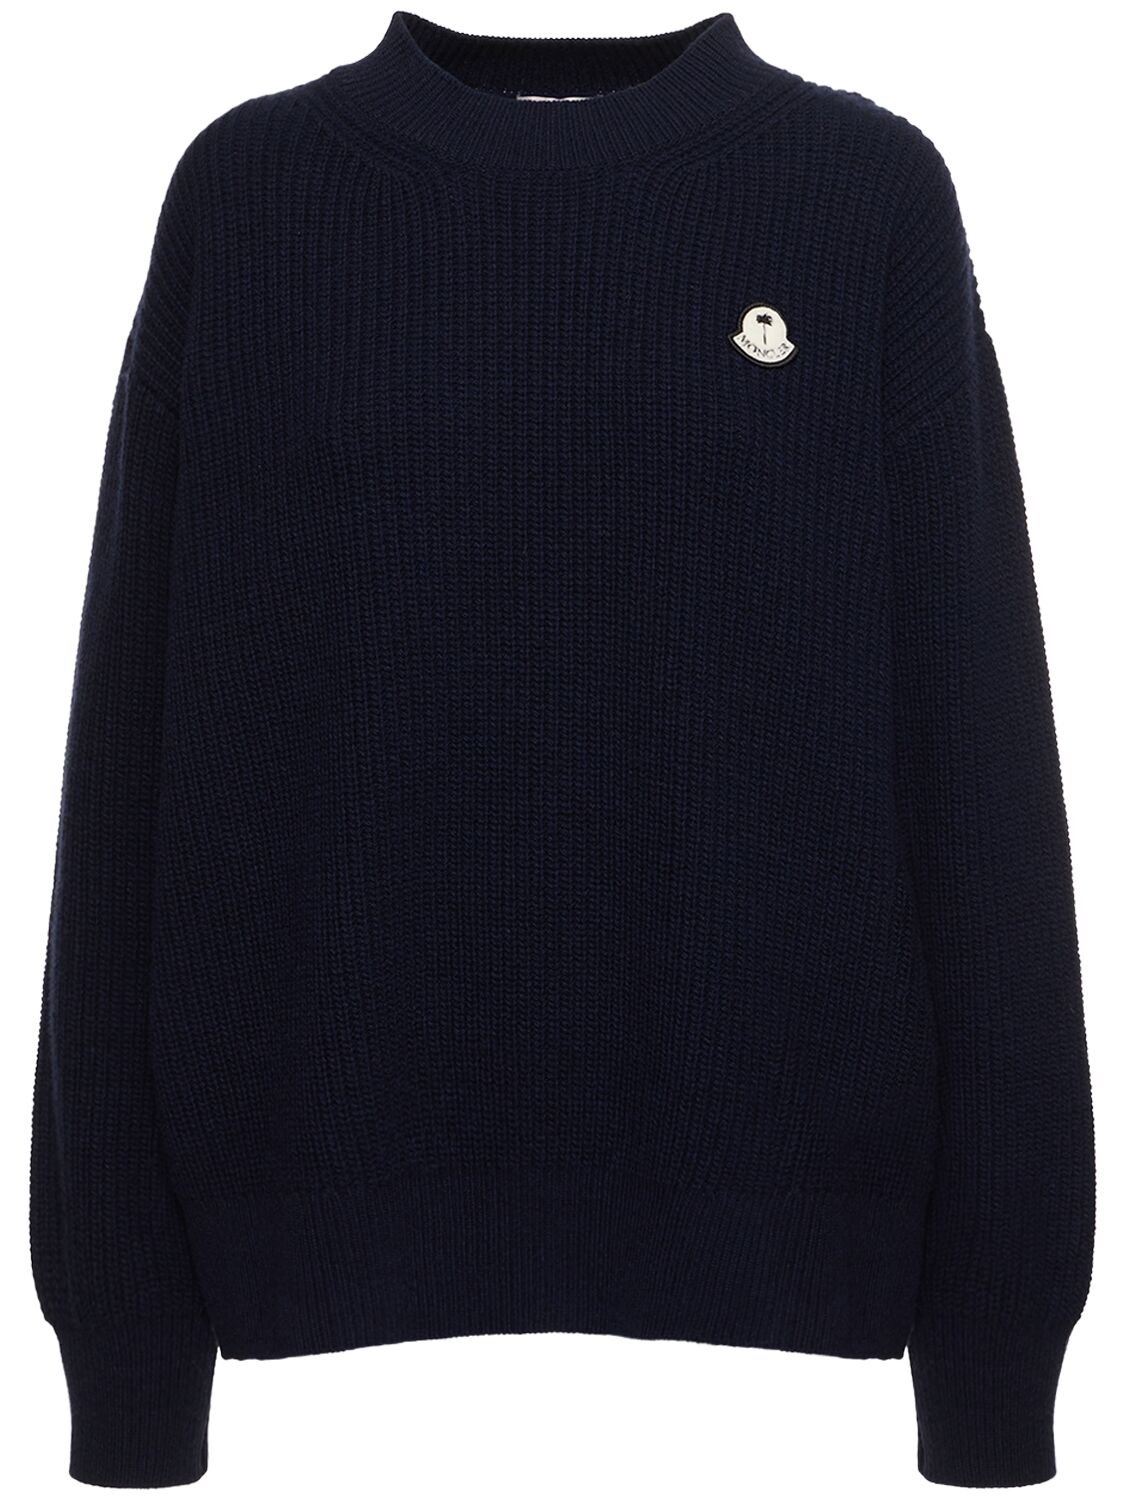 Moncler Genius Moncler X Palm Angels羊毛毛衣 In Navy